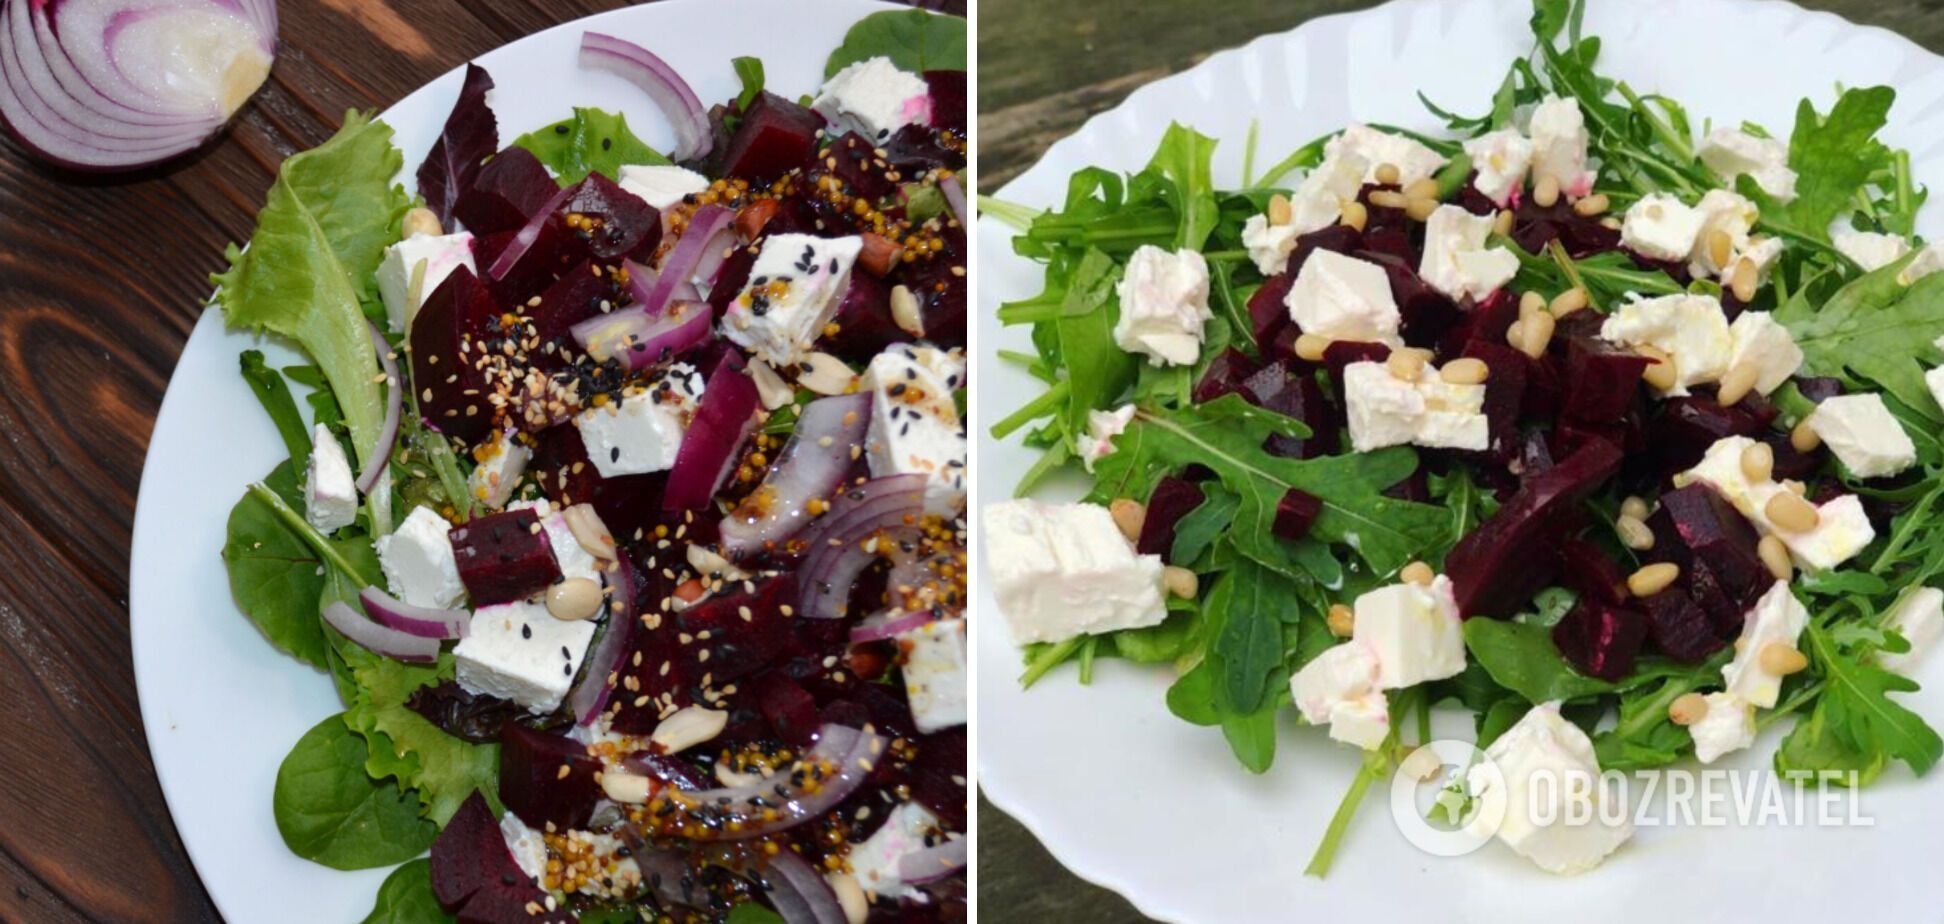 Salad with beets, feta, and nuts